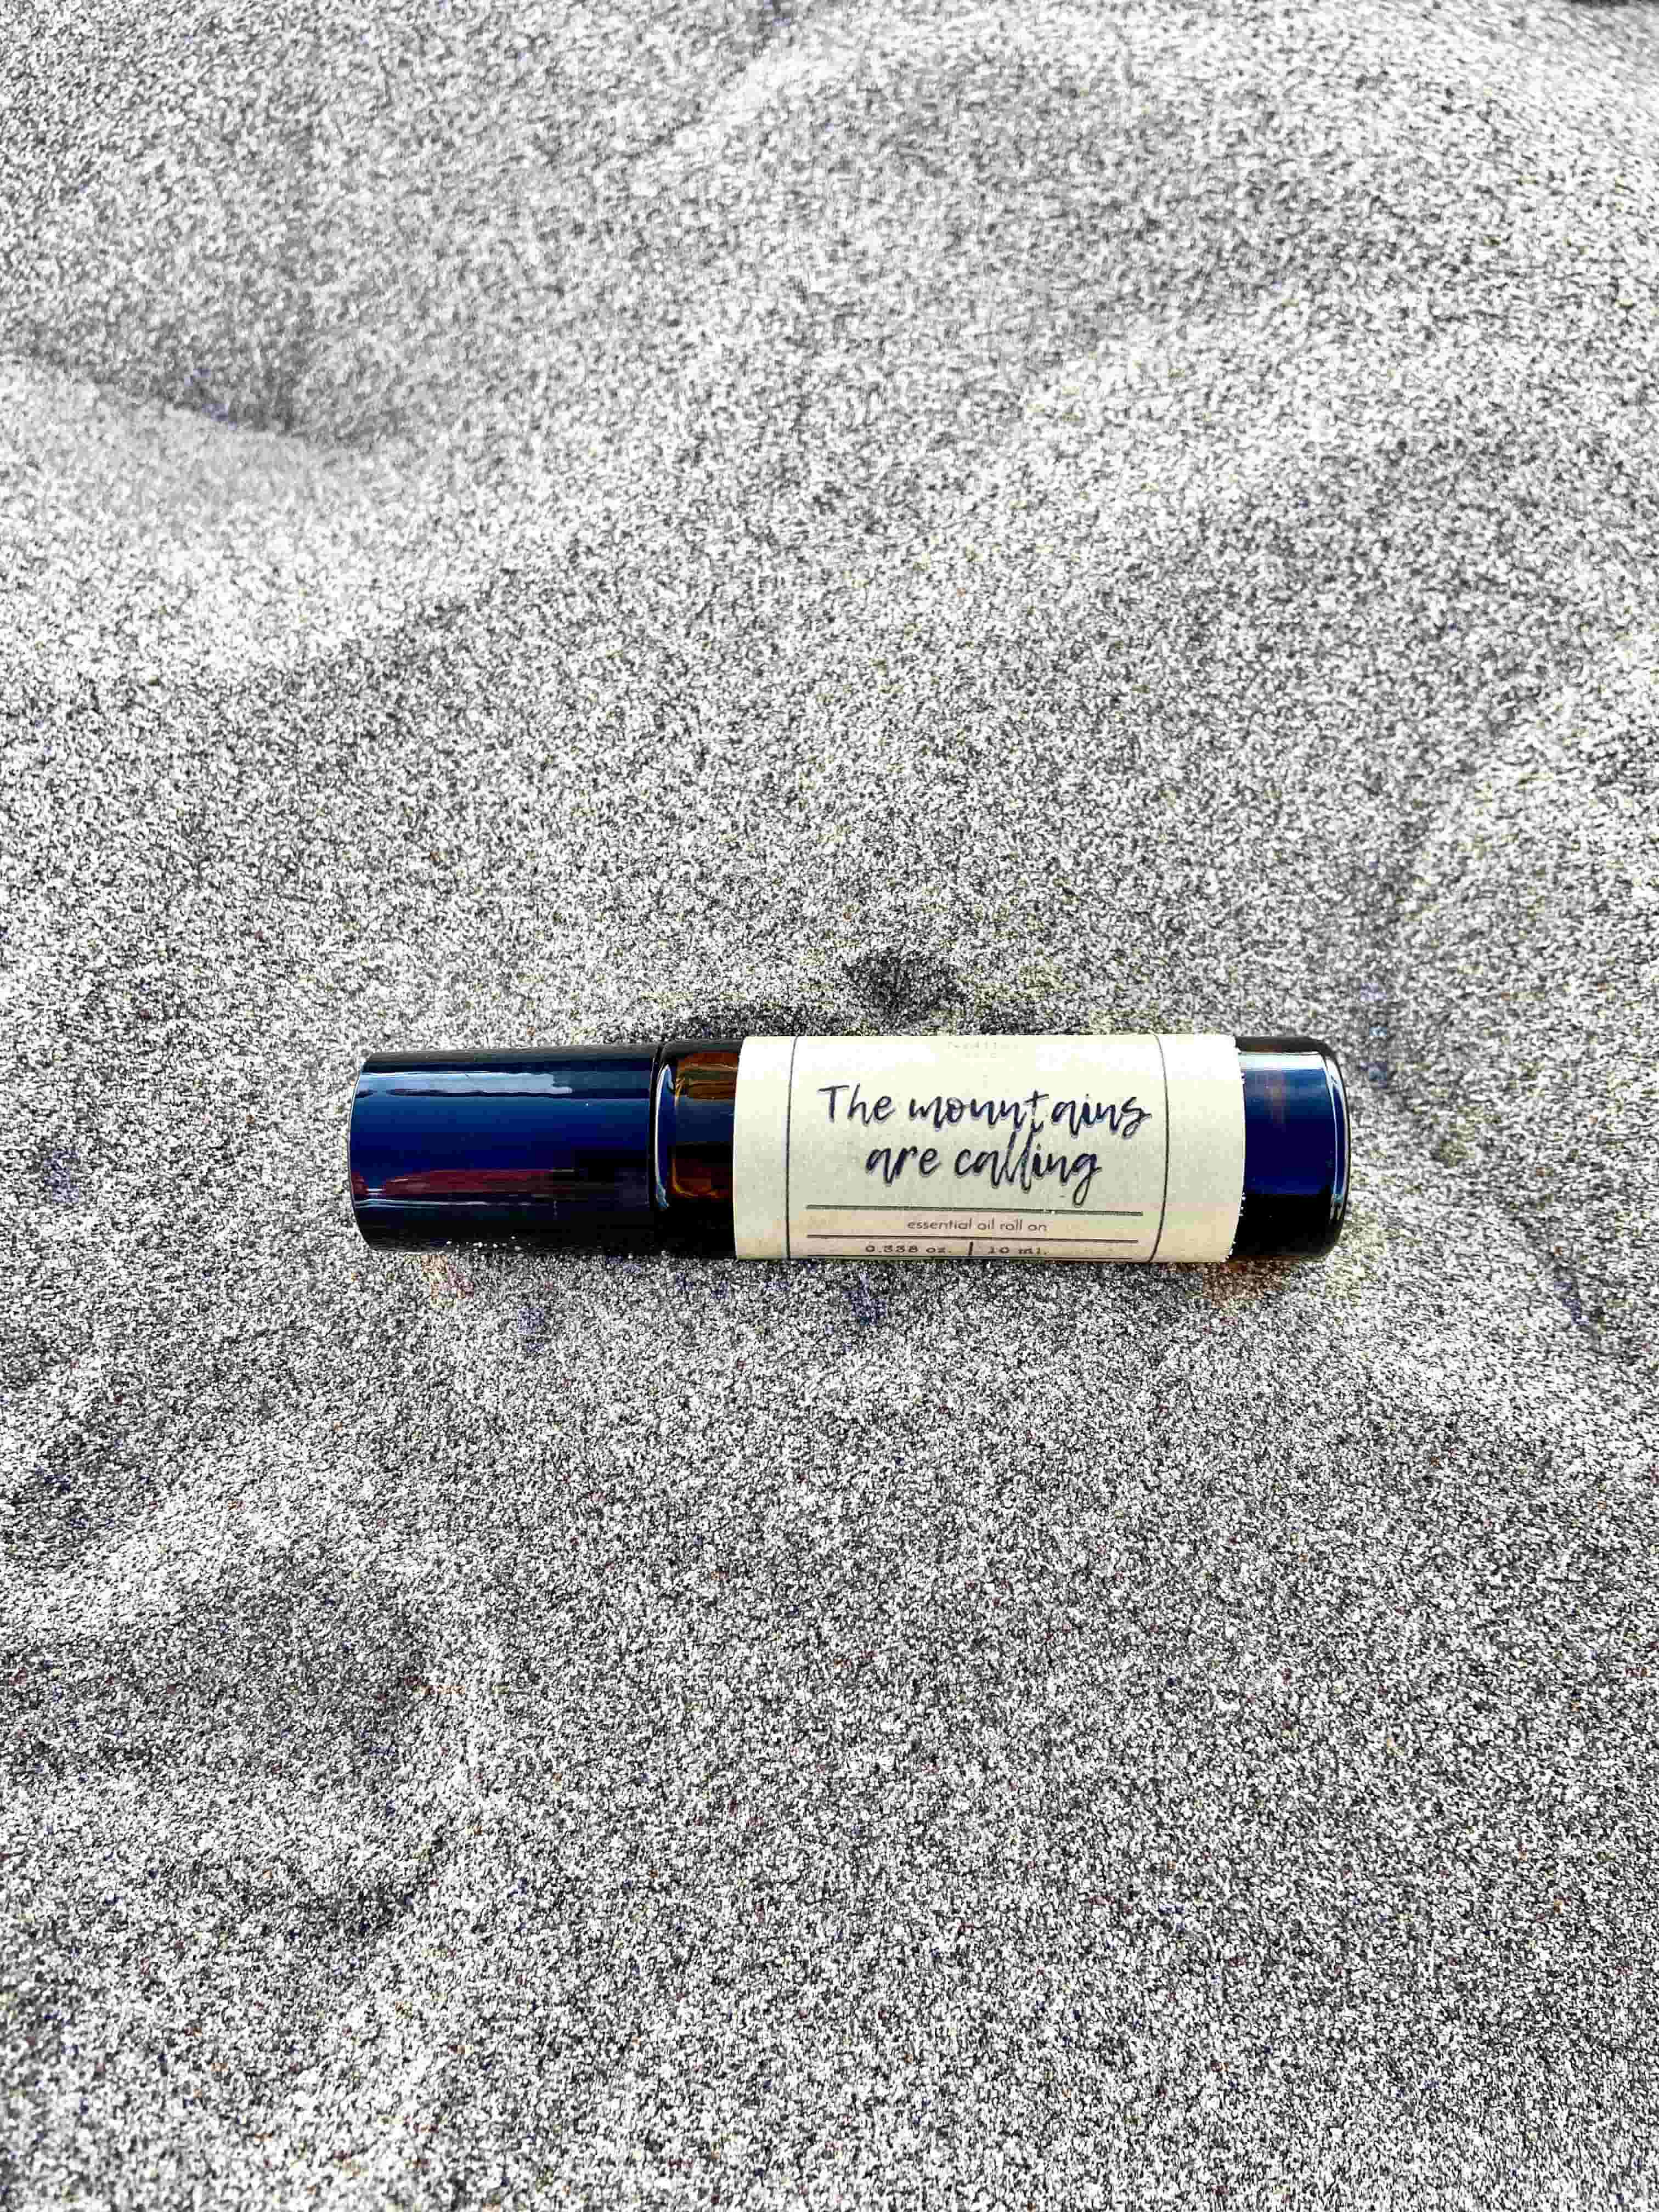 The Mountains are Calling Essential Oil Roll On. Made with 100% therapeutic grade essential oils and apricot oil, this natural and nourishing roll on has a woodsy, earthy aroma perfect for soothing stress and anxiety.